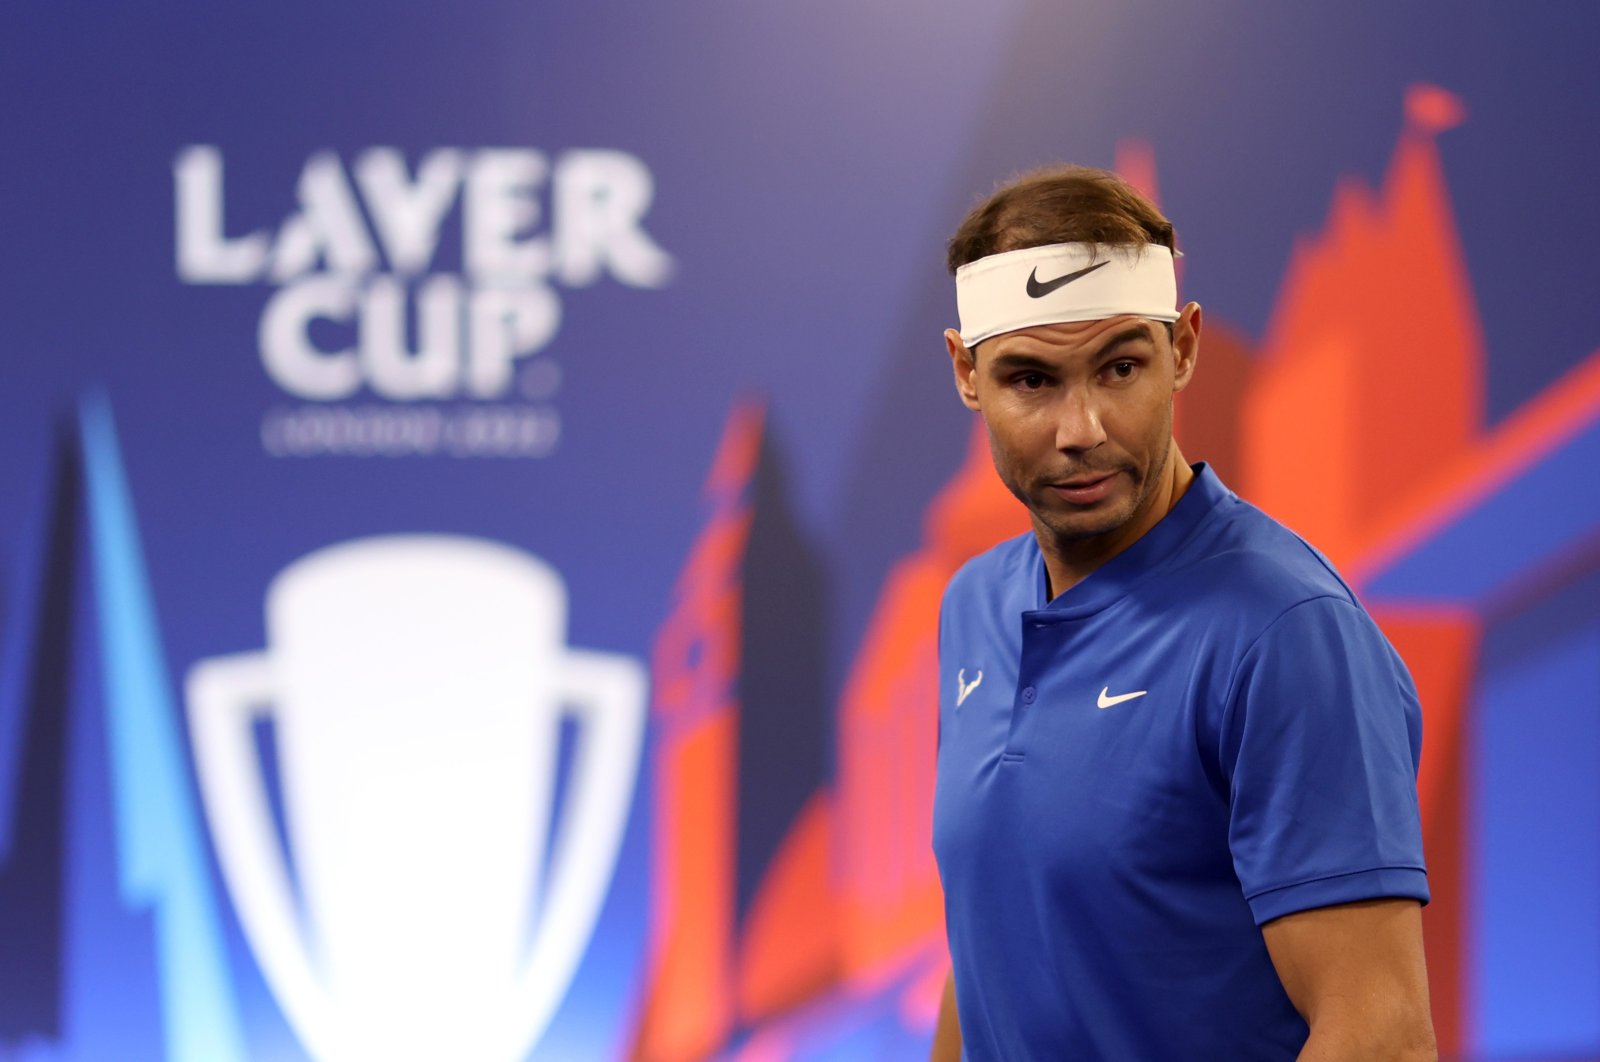 Rafael Nadal of Team Europe trains in the gym during Day One of the Laver Cup at The O2 Arena. London, England, Sept. 23, 2022. (Getty Photo)